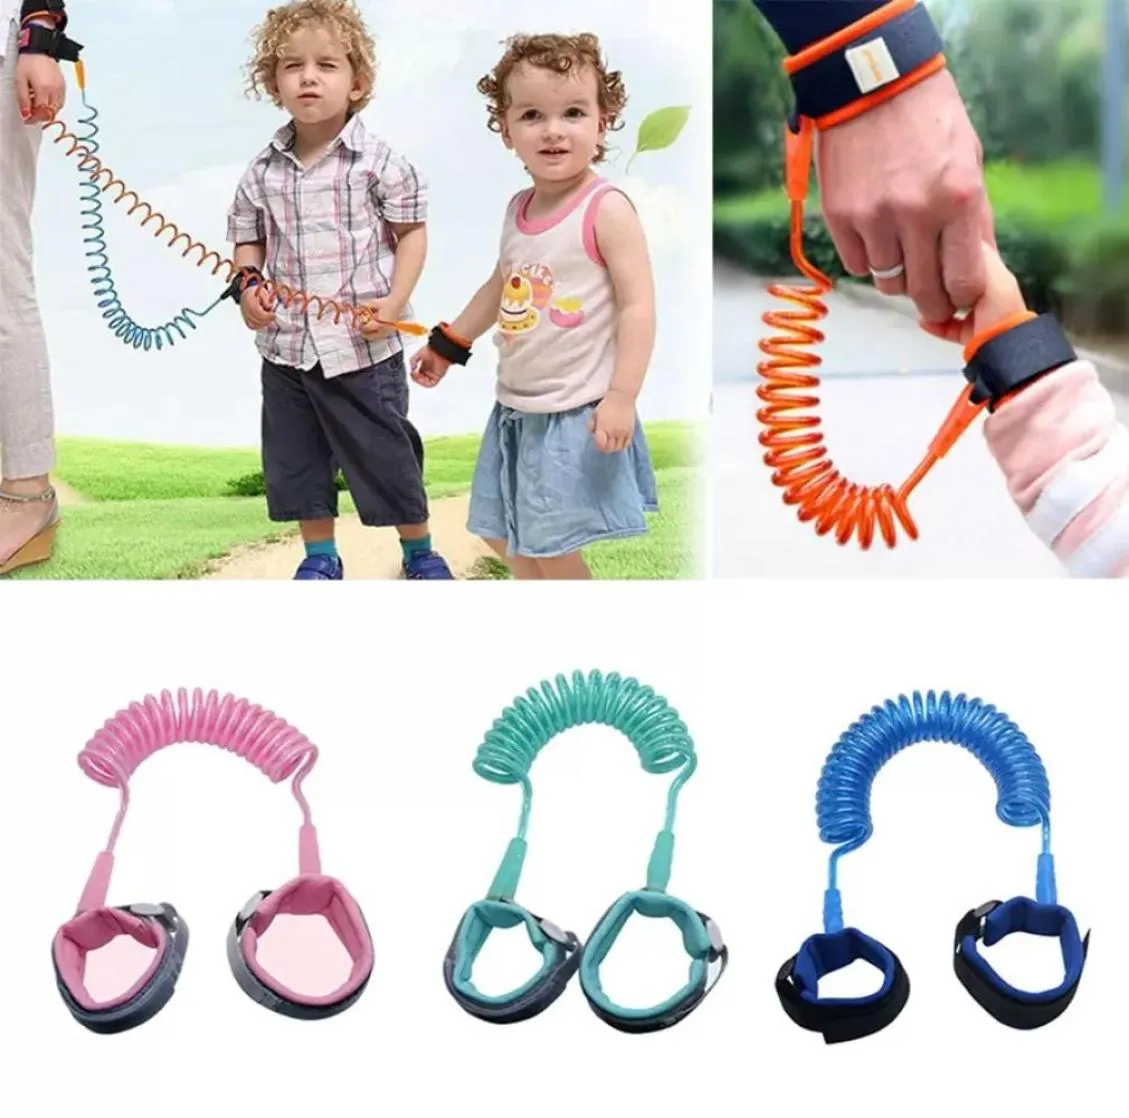 15m Children Anti Lost Strap Out Of Home Kids Safety Wristband Toddler Harness Leash Bracelet Child Walking Traction Rope C0417W9812110